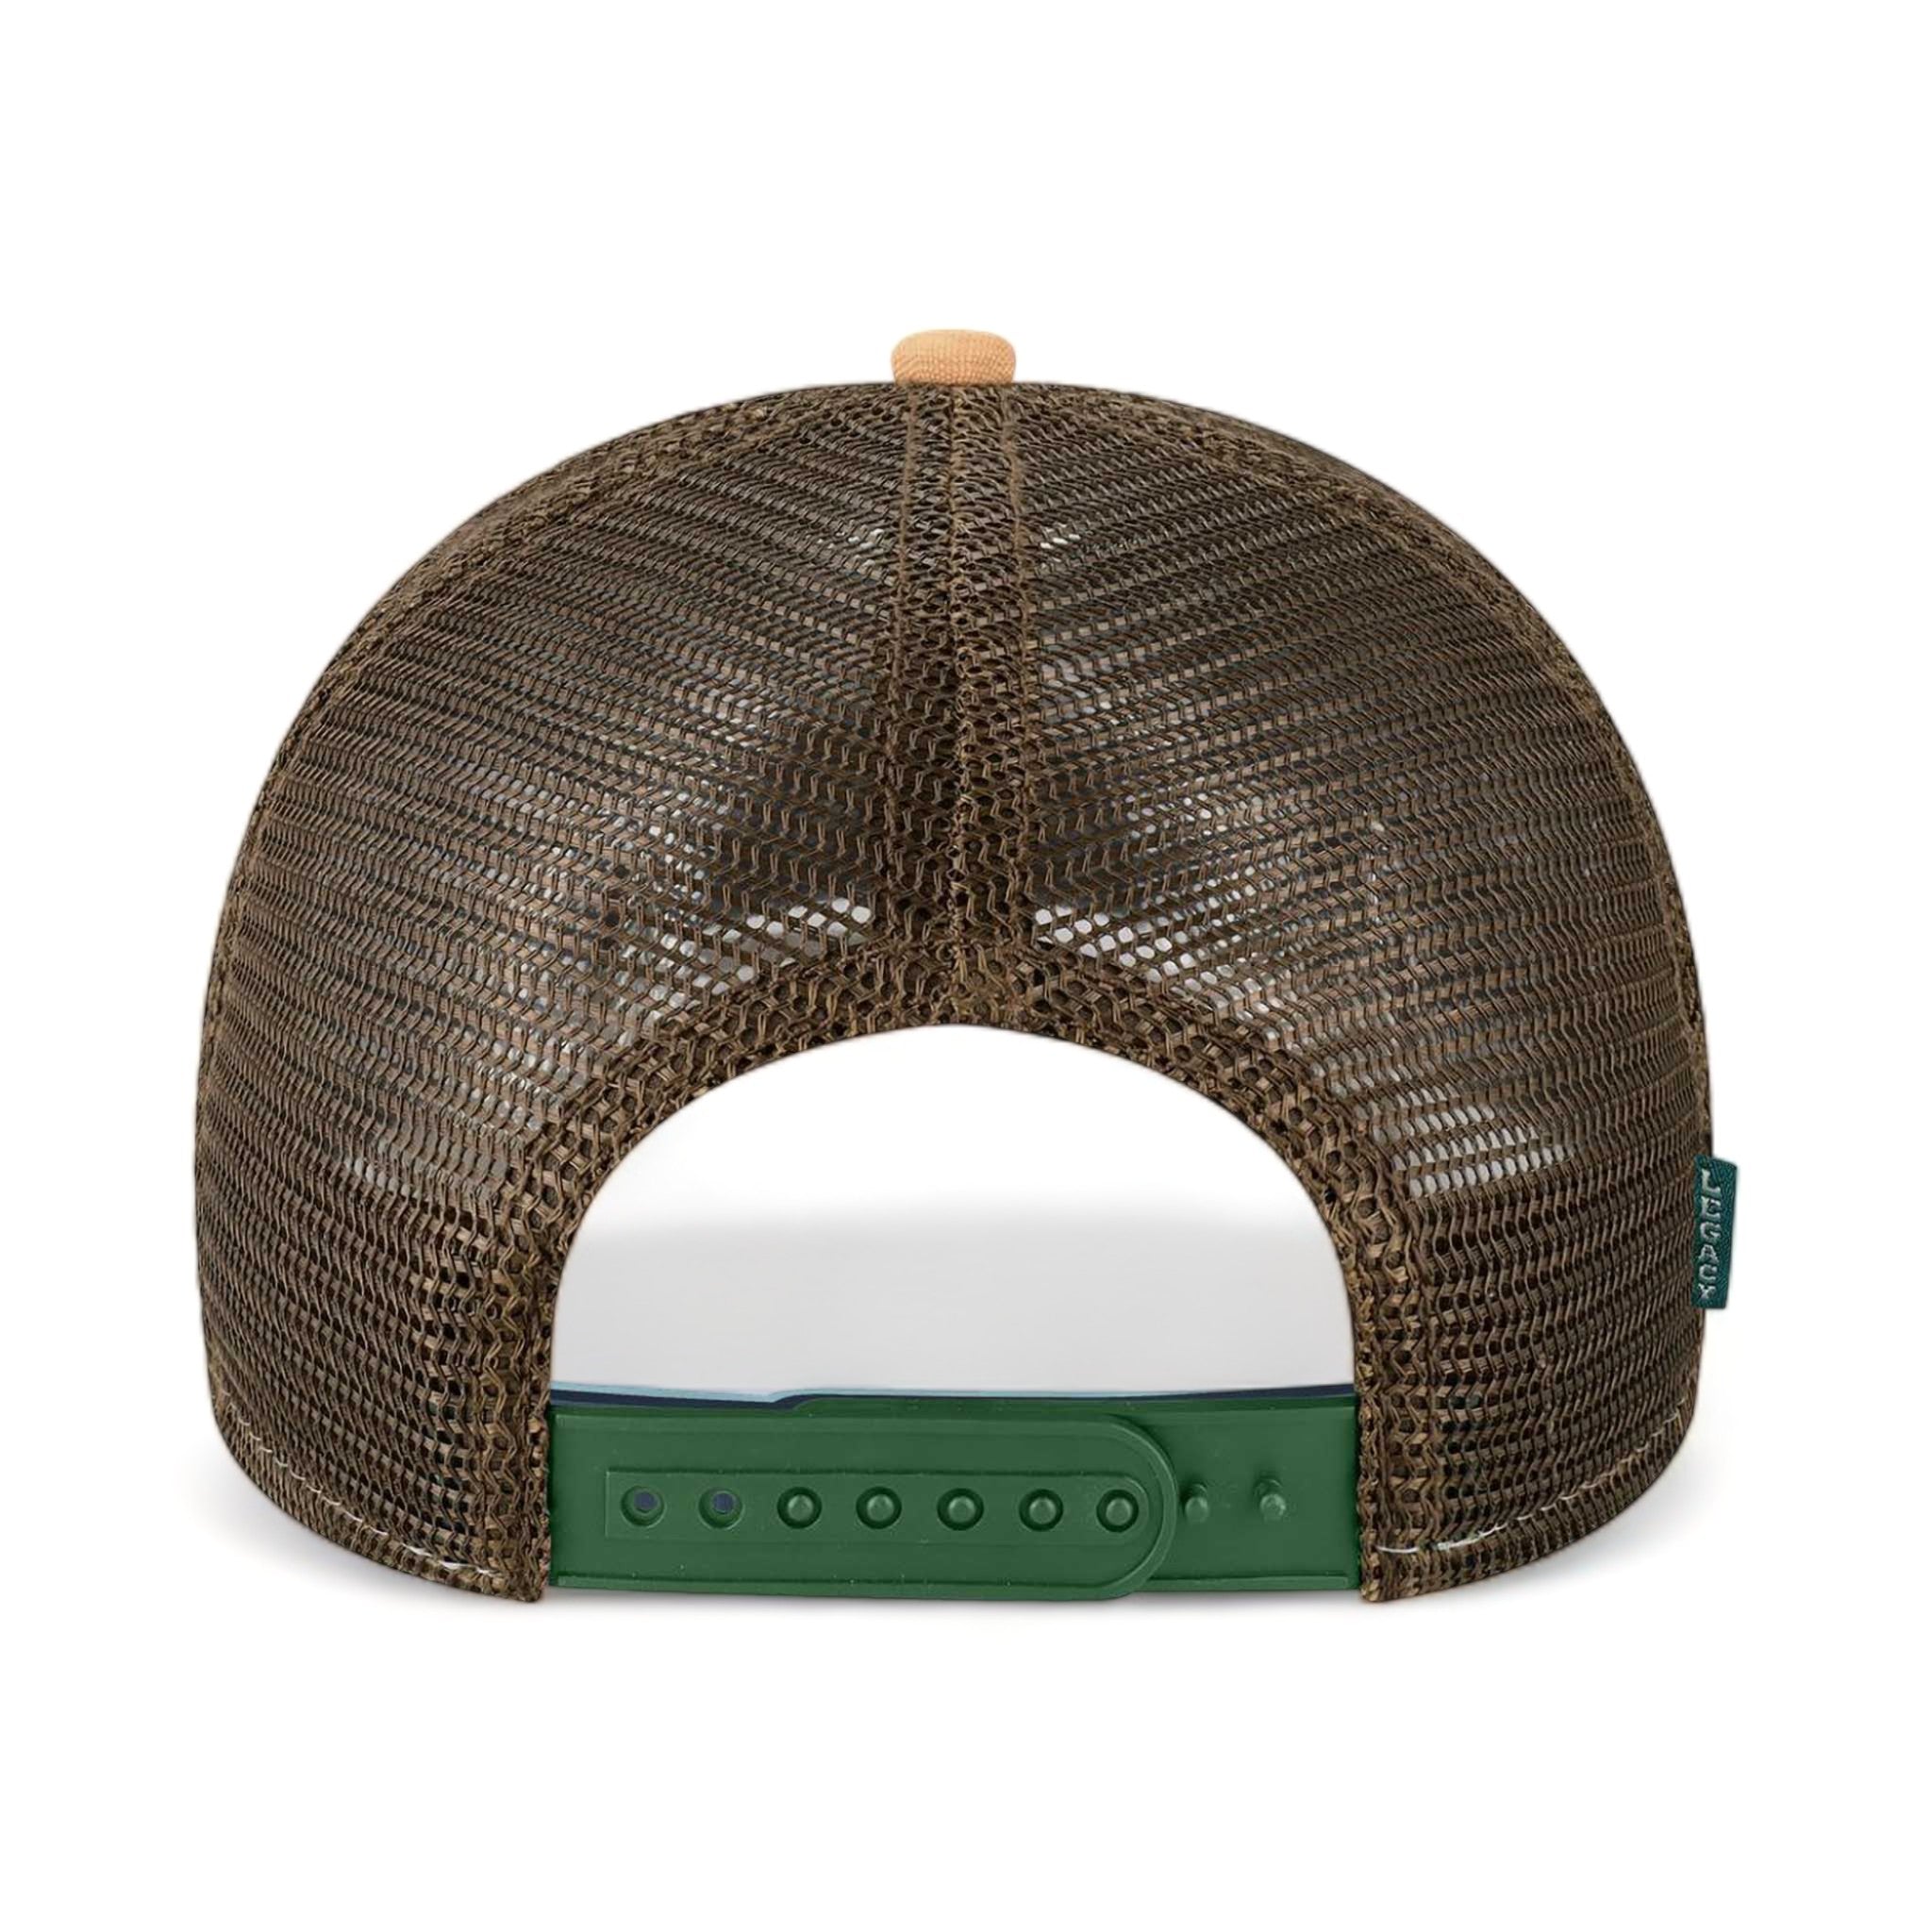 Back view of LEGACY MPS custom hat in dark green, camel and brown